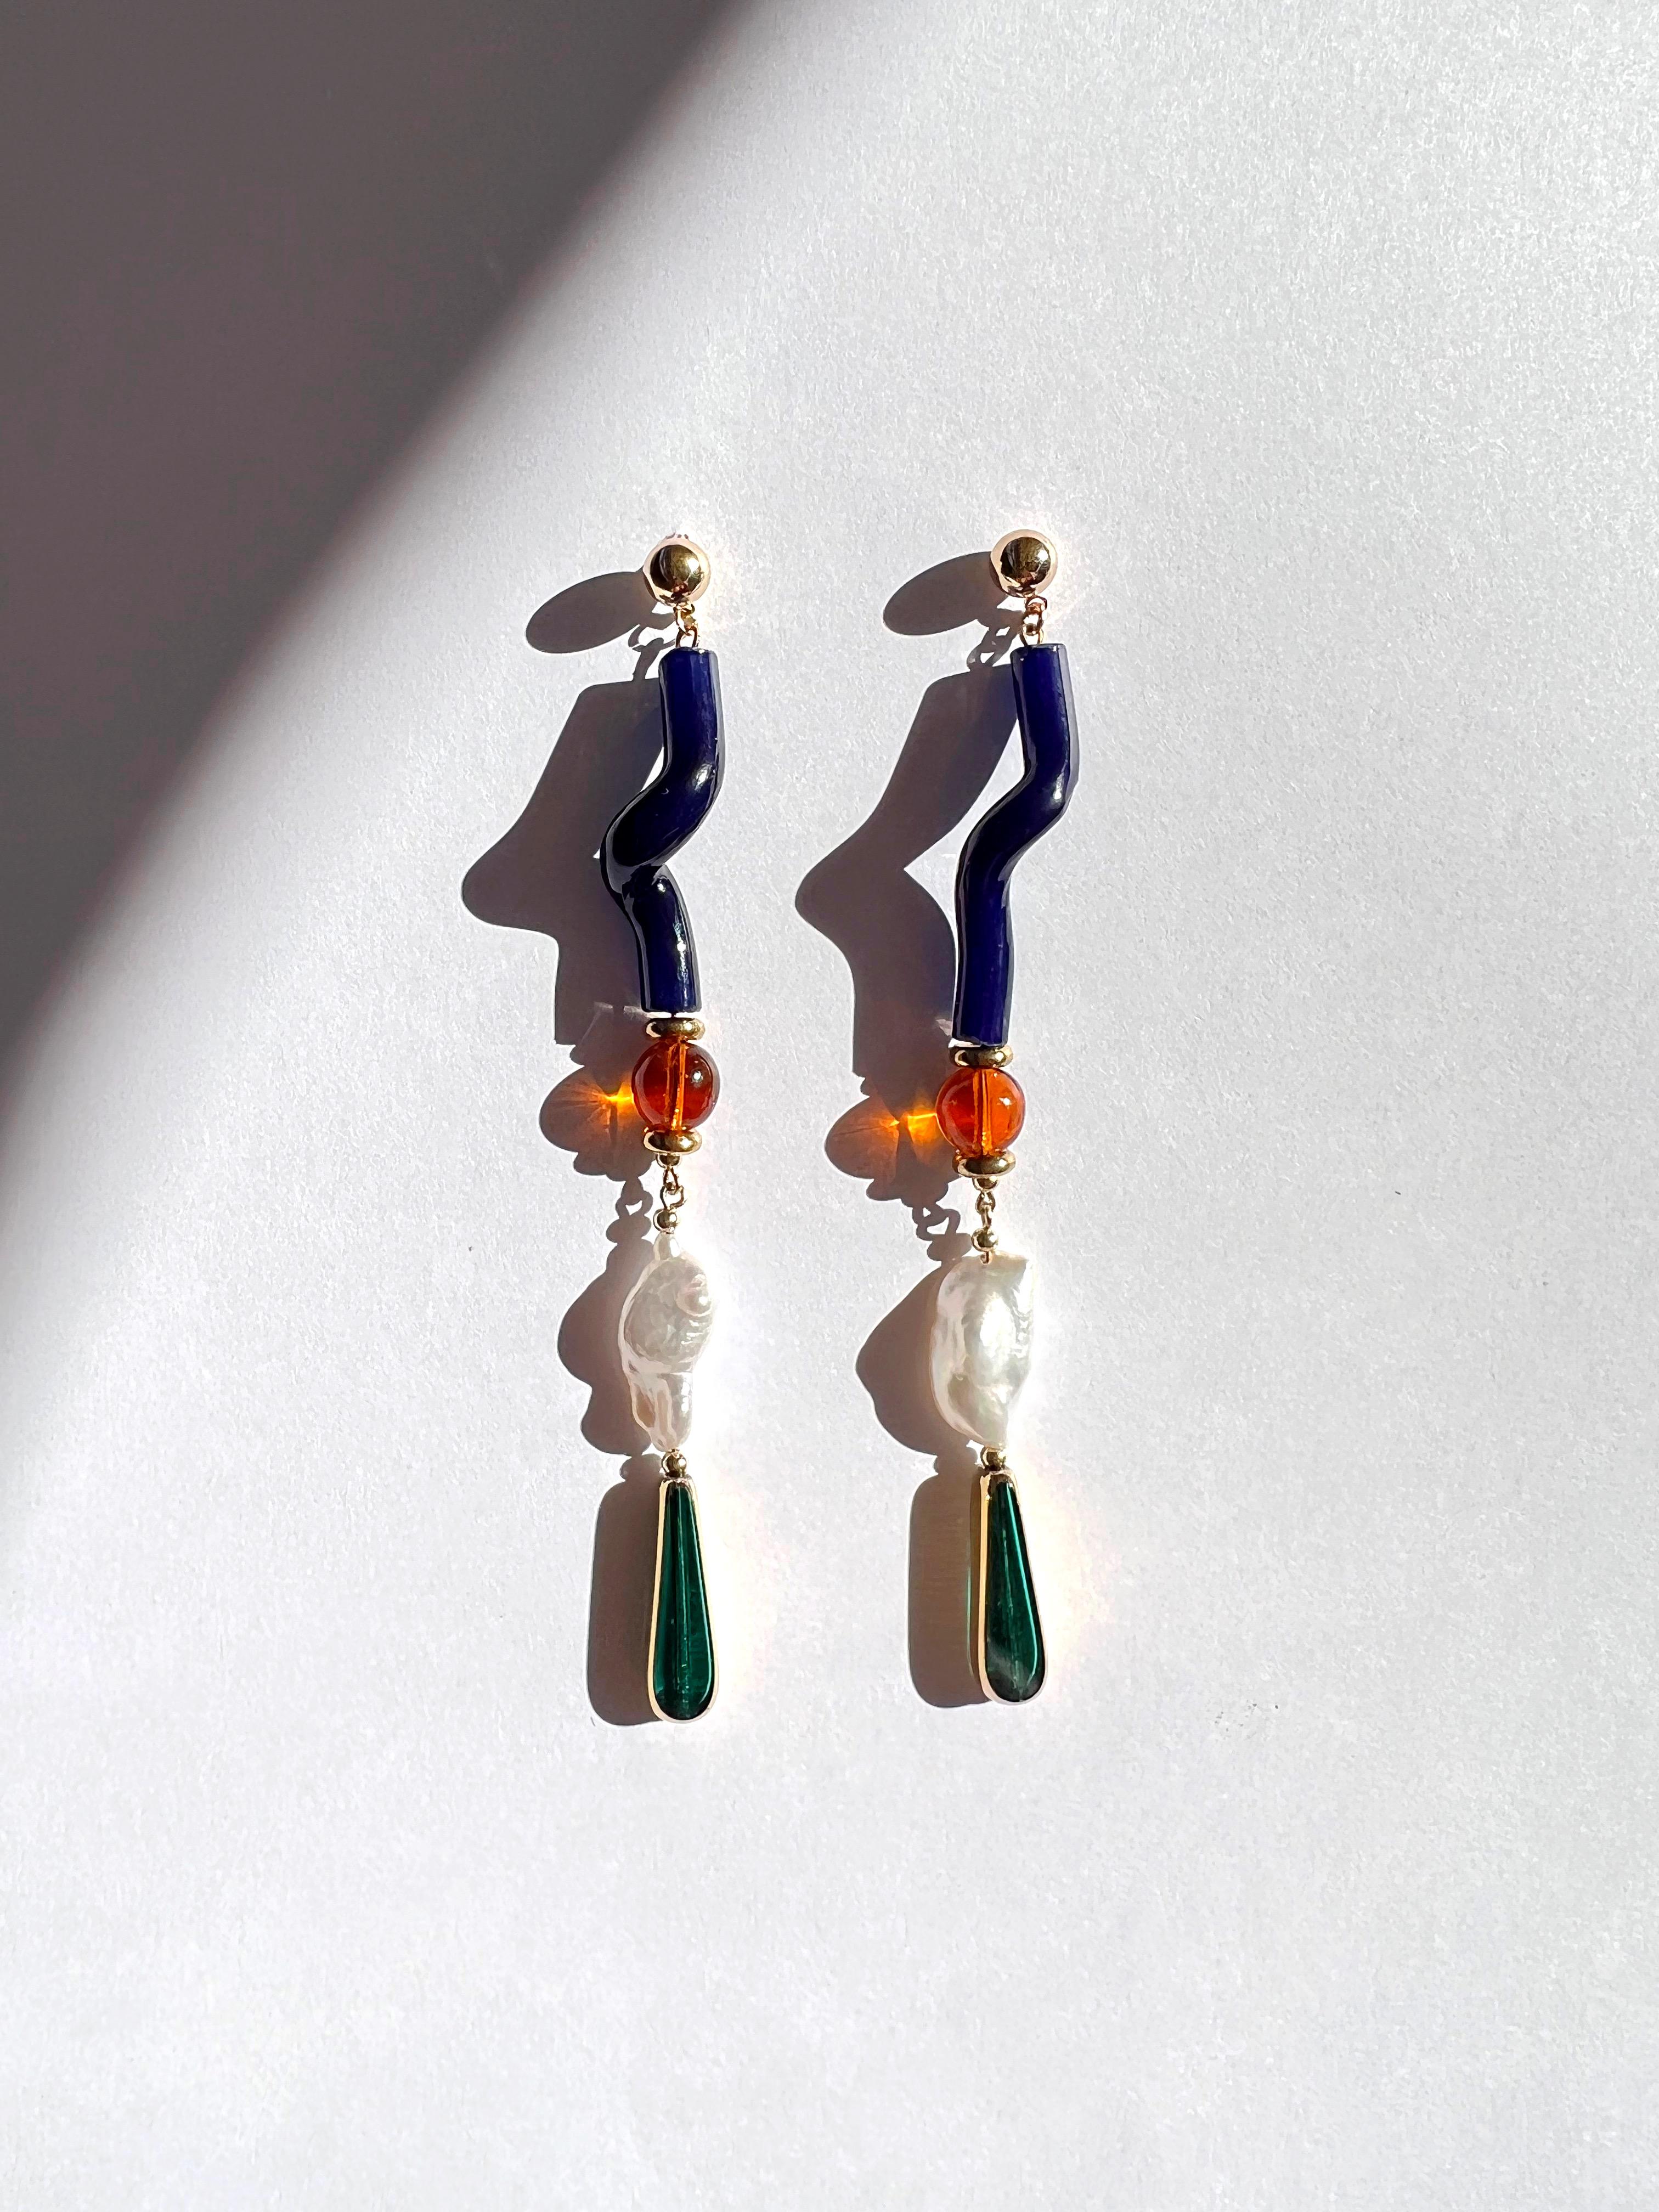 These gorgeous earrings is even more stunning when the light shines through. These earrings sway with movement. They are composed of biwa pearls, amber colored glass beads, vintage twisted glass bead and complimented with 24K vintage German glass